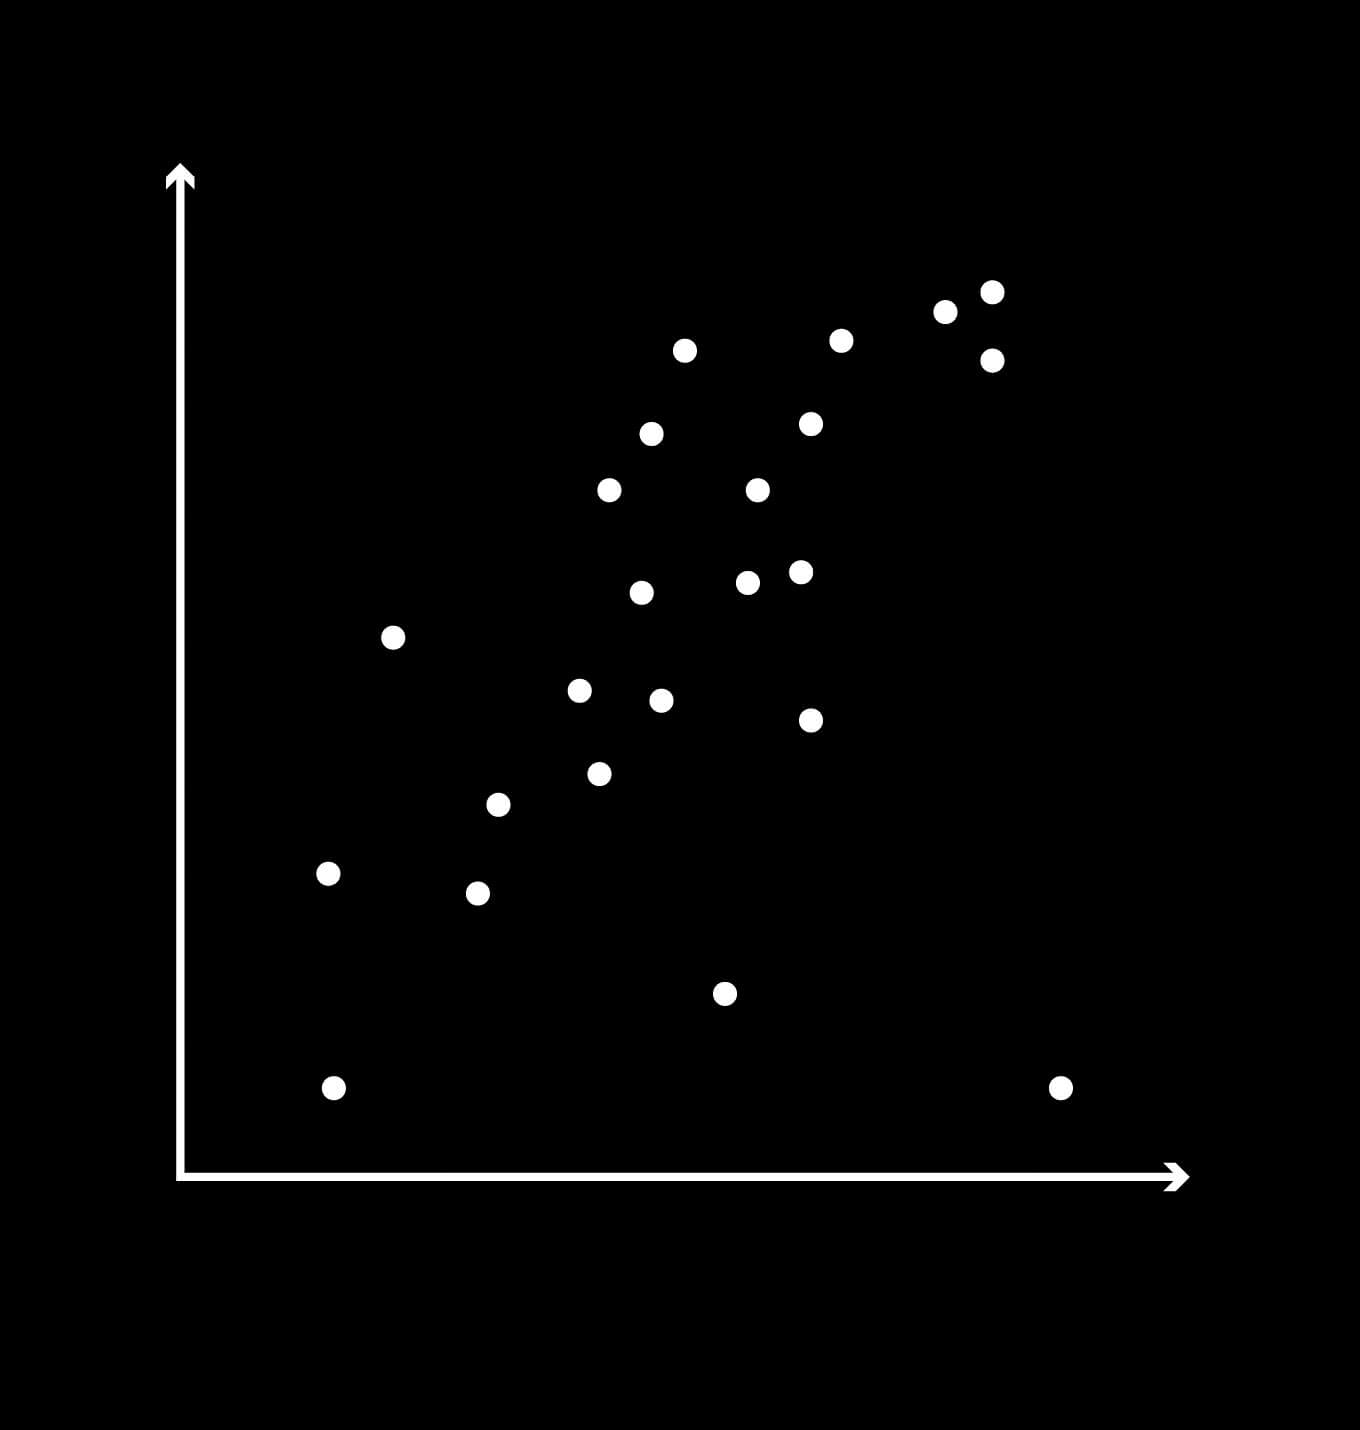 Dots in a coordinate system